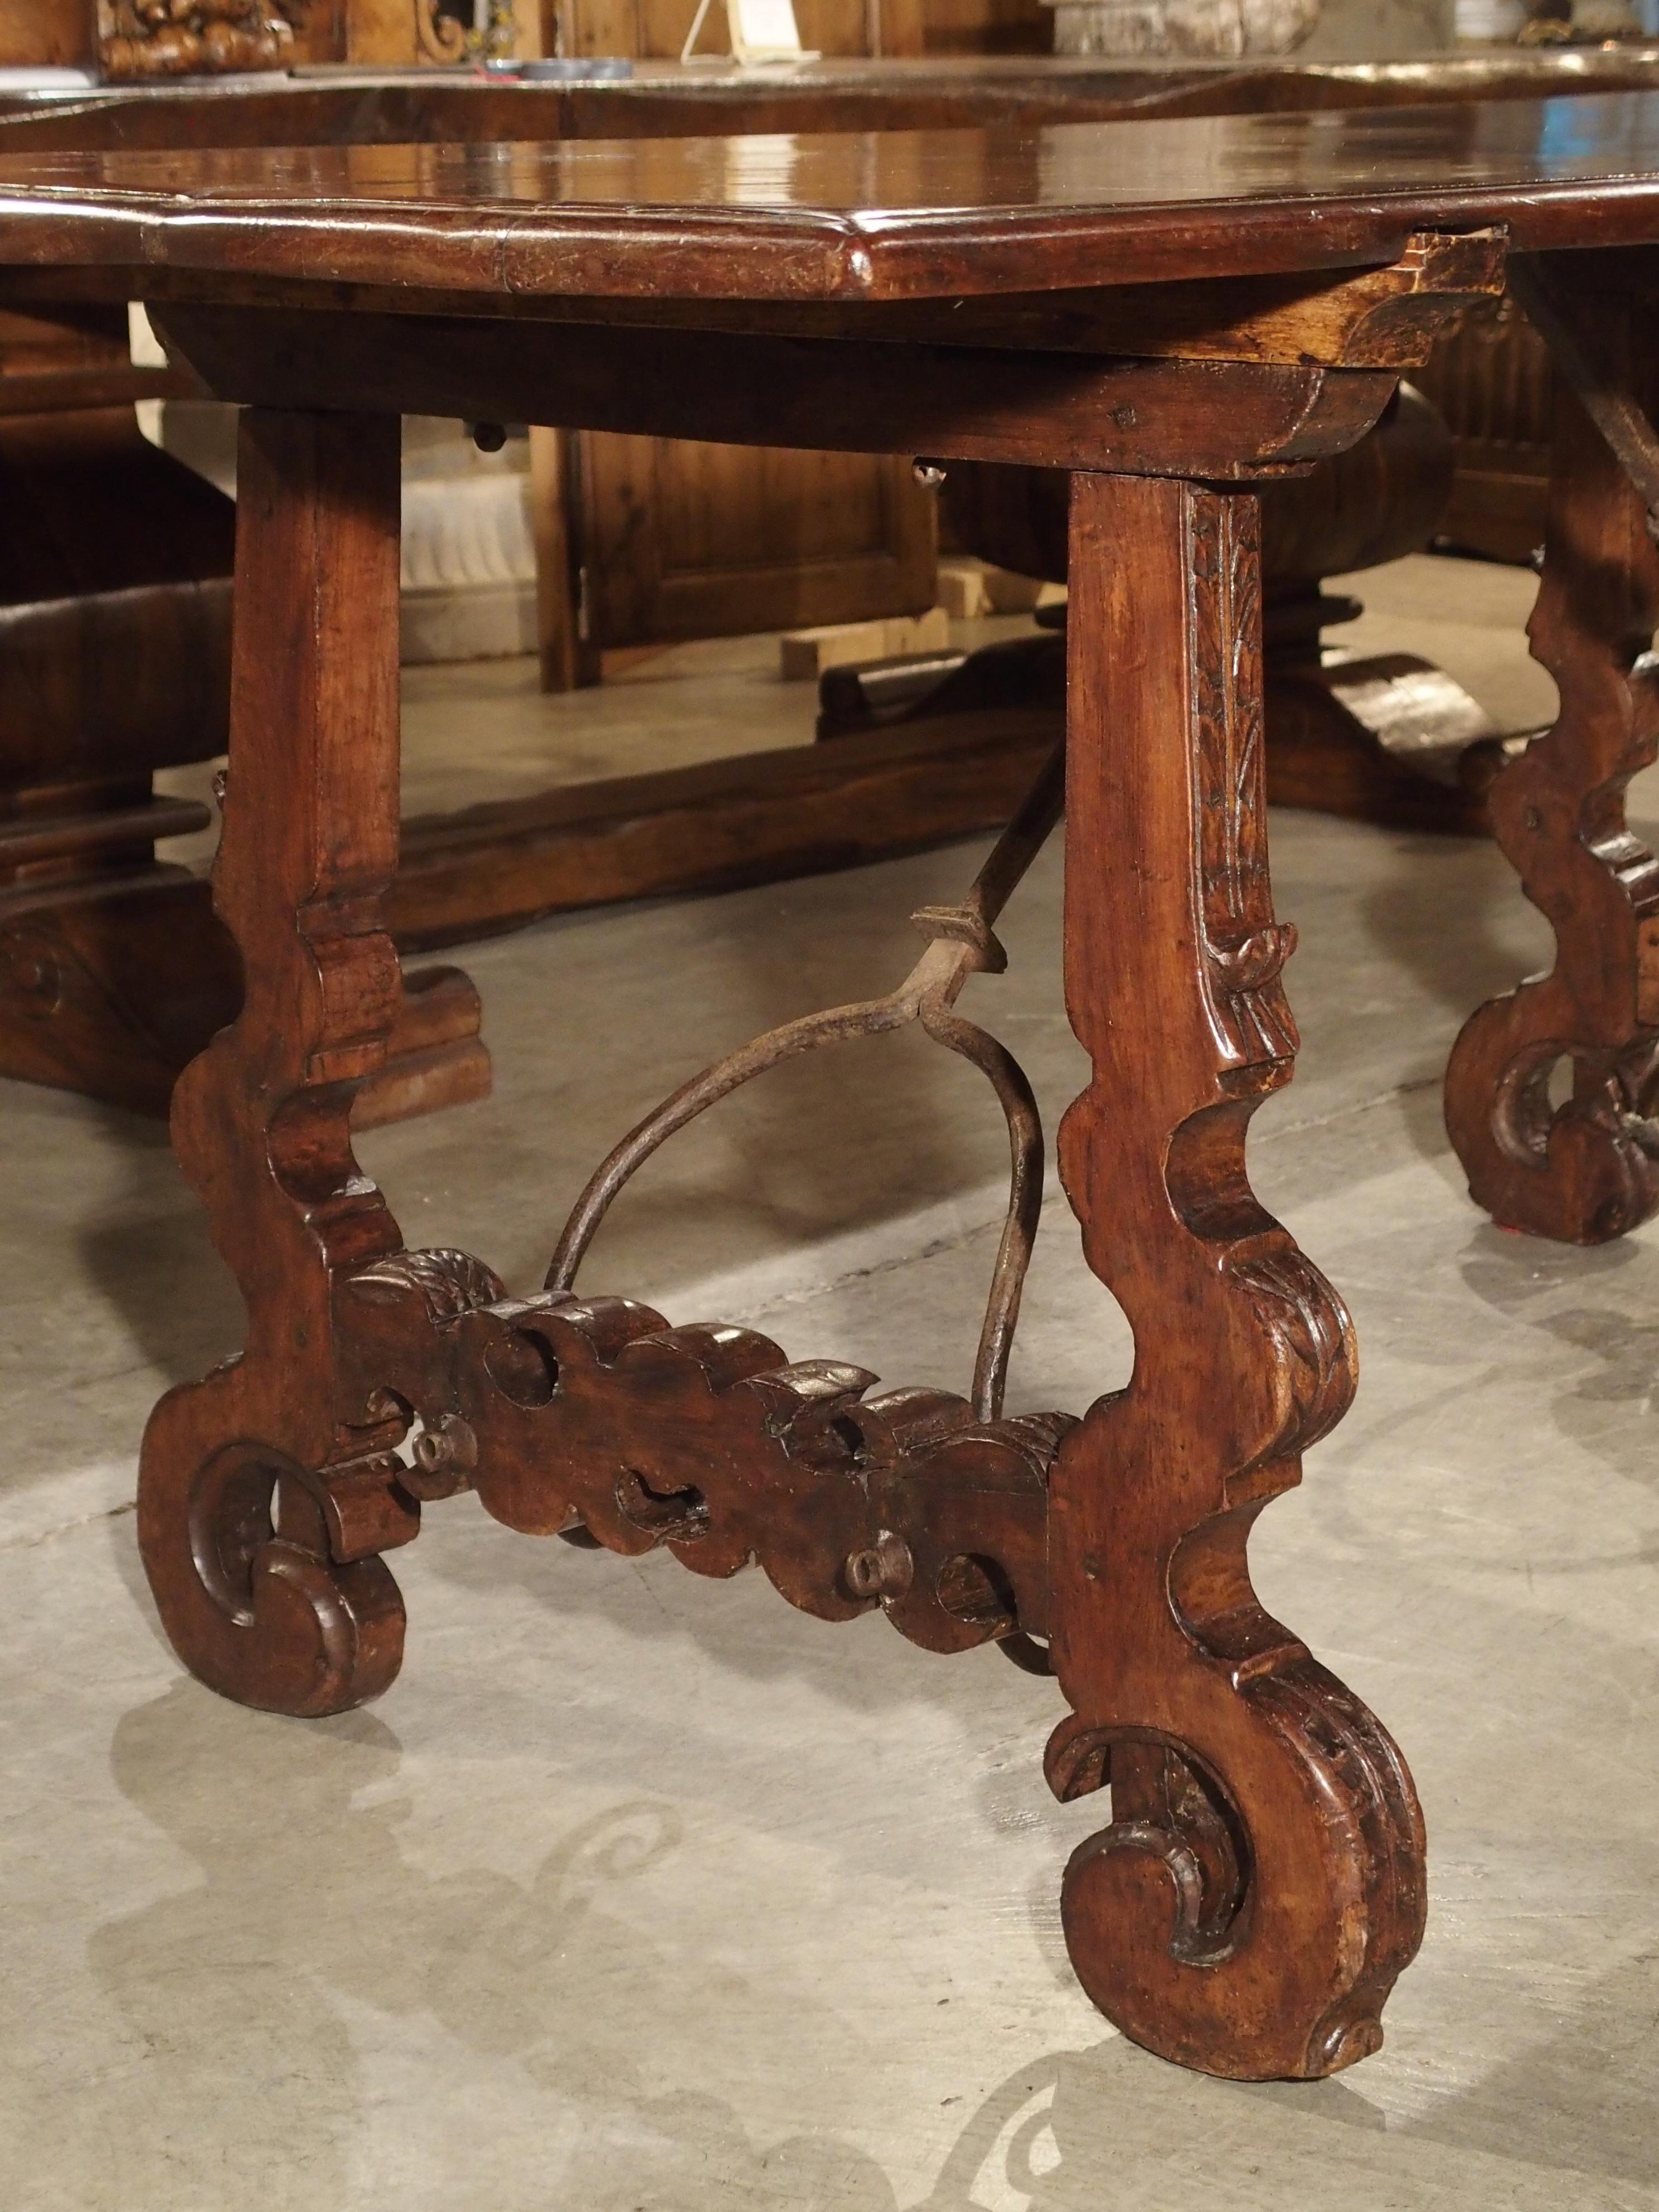 Spanish Antique Walnut and Iron Table from Spain, circa 1800